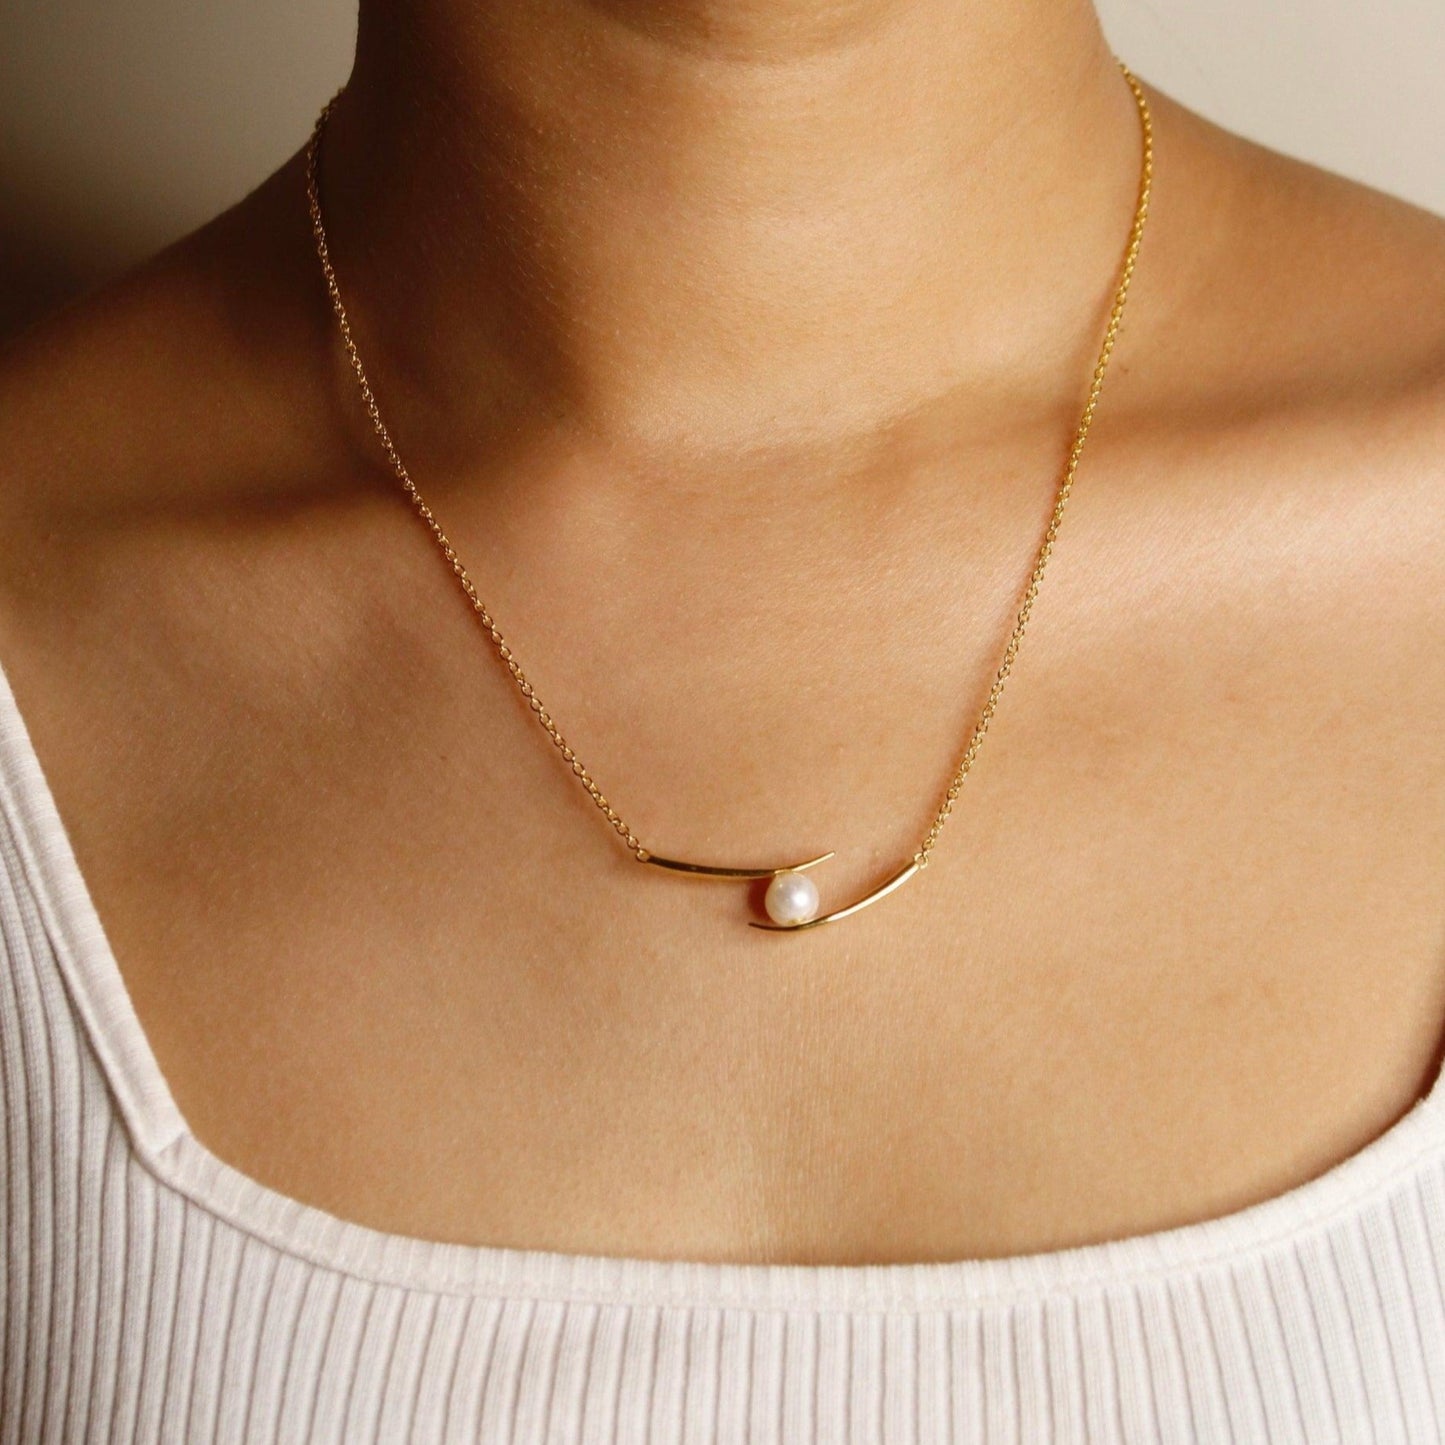 Natural Pearl Mist Necklace| 925 Silver| 18kt Gold Plated - From Purl Purl